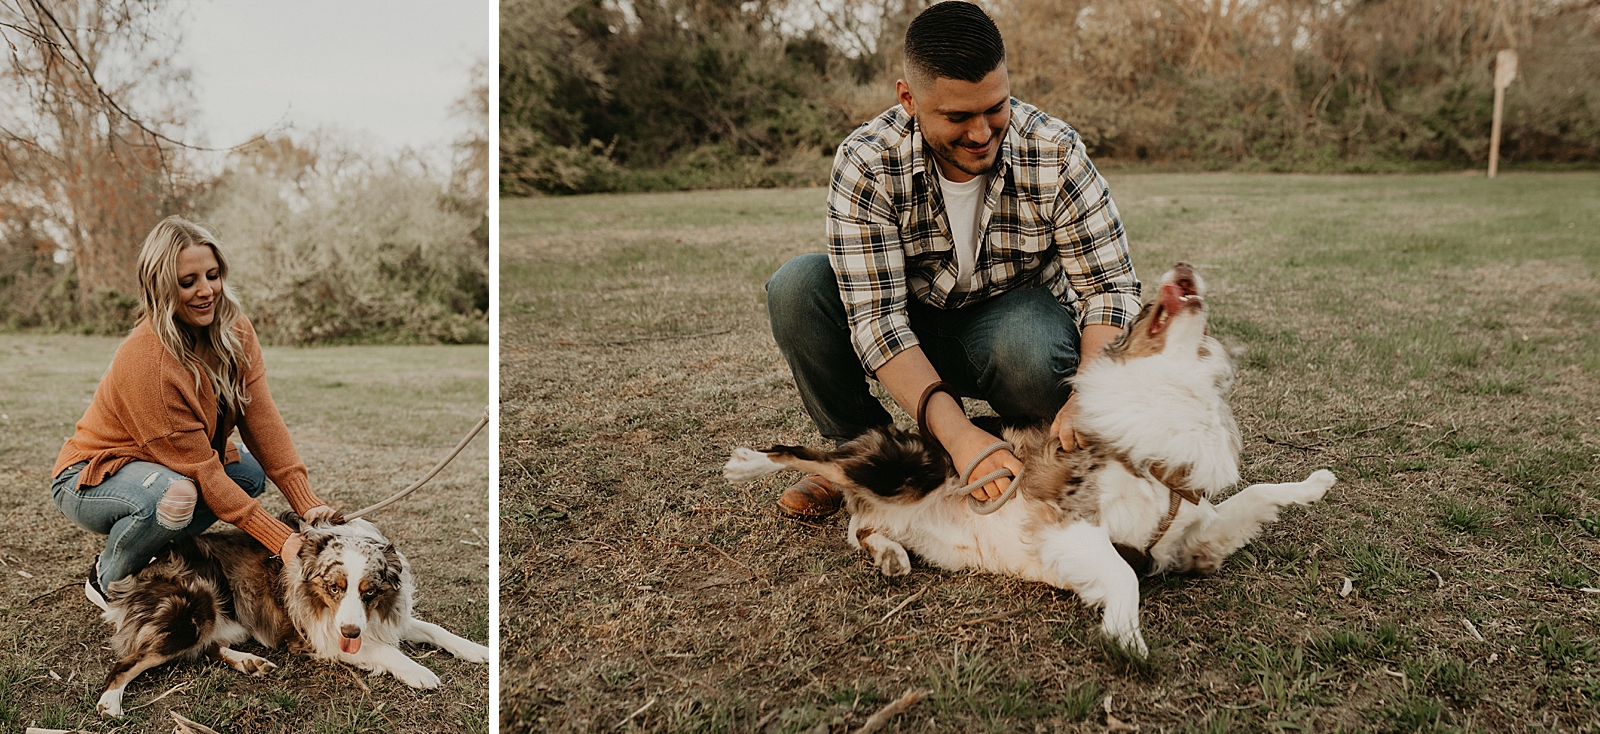 Individual portraits of couple petting and playing with dog on grassy field